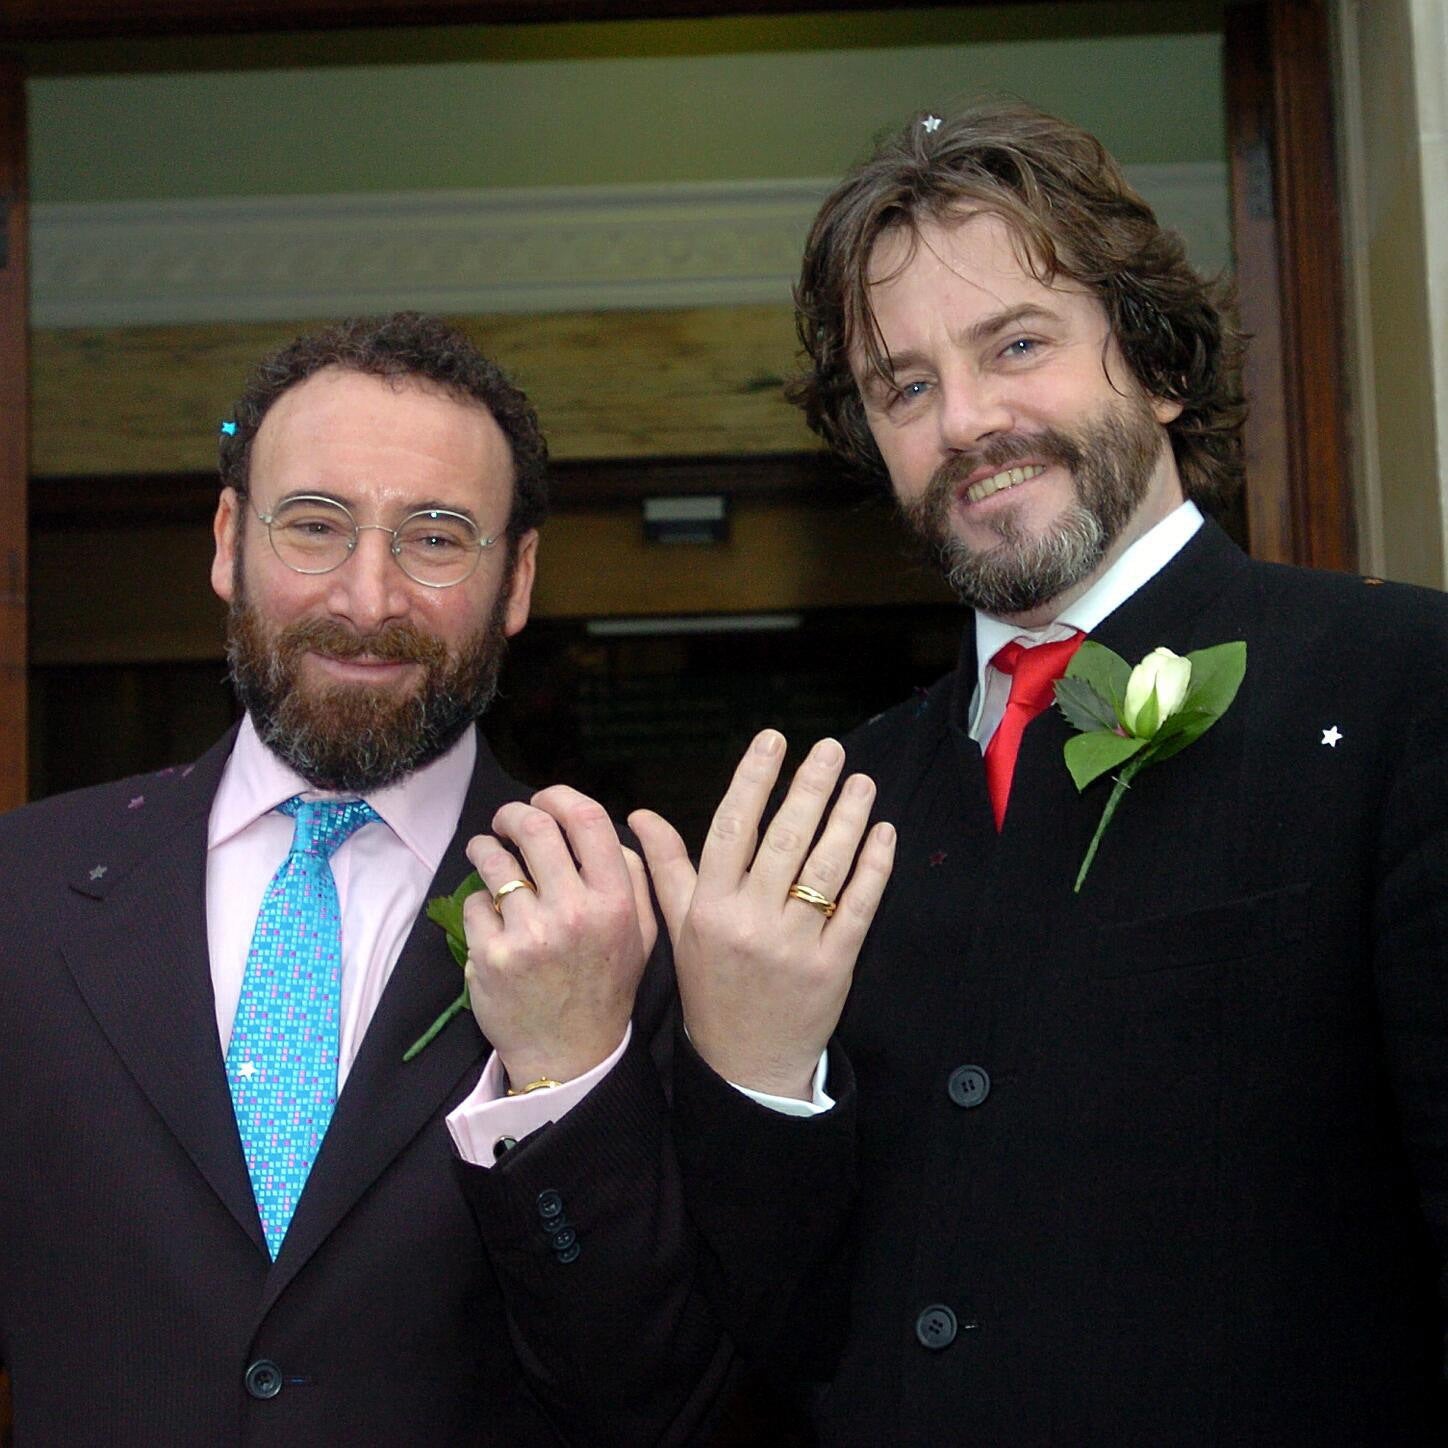 Sir Antony (left) and Greg Doran tied the knot as soon as they were legally able to do so in the UK